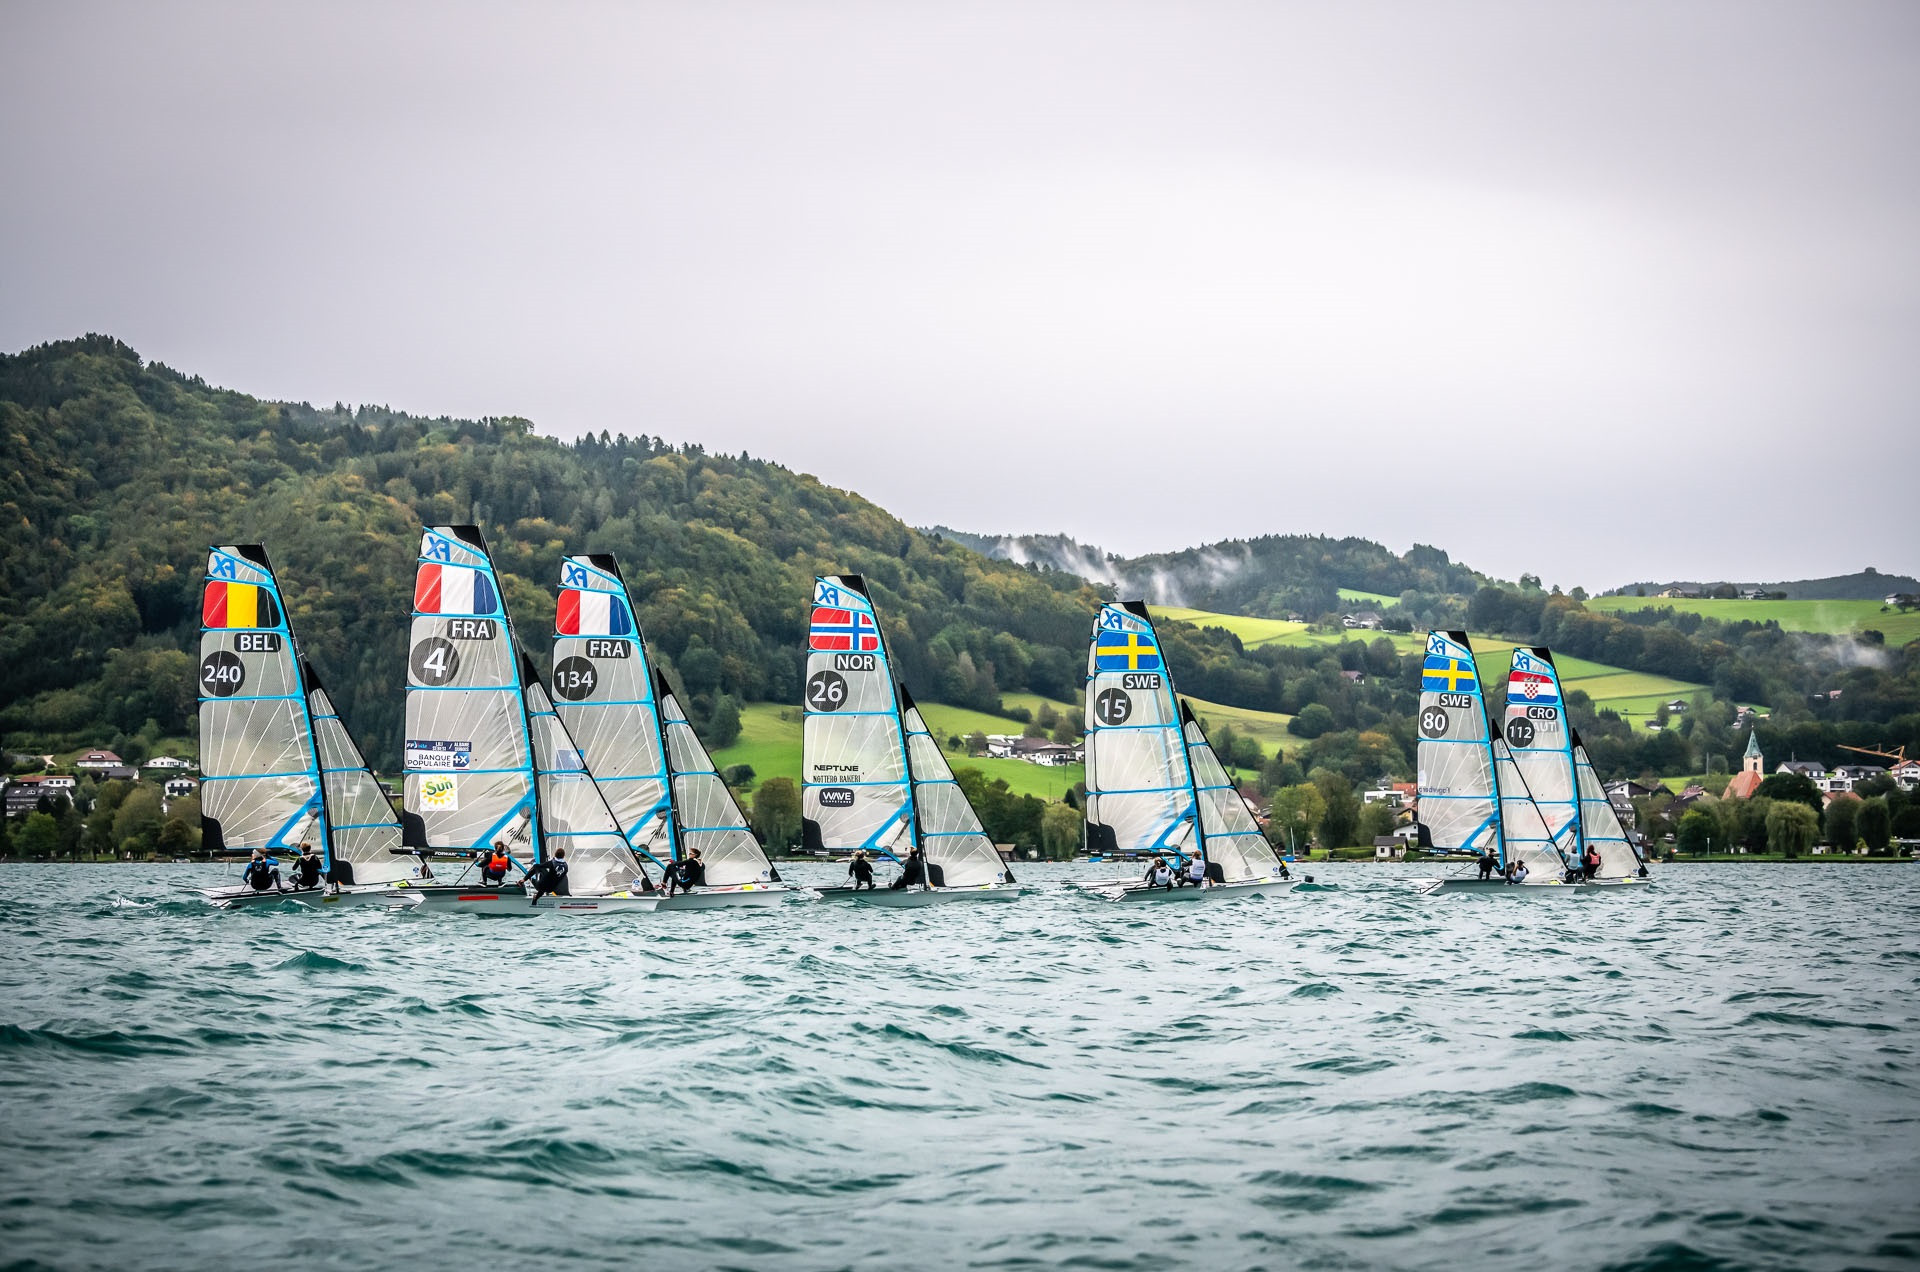 Weather conditions on Lake Attersee meant there was no racing in the 49erFX and Nacra 17 contests ©Tobias Stoerkle Photography